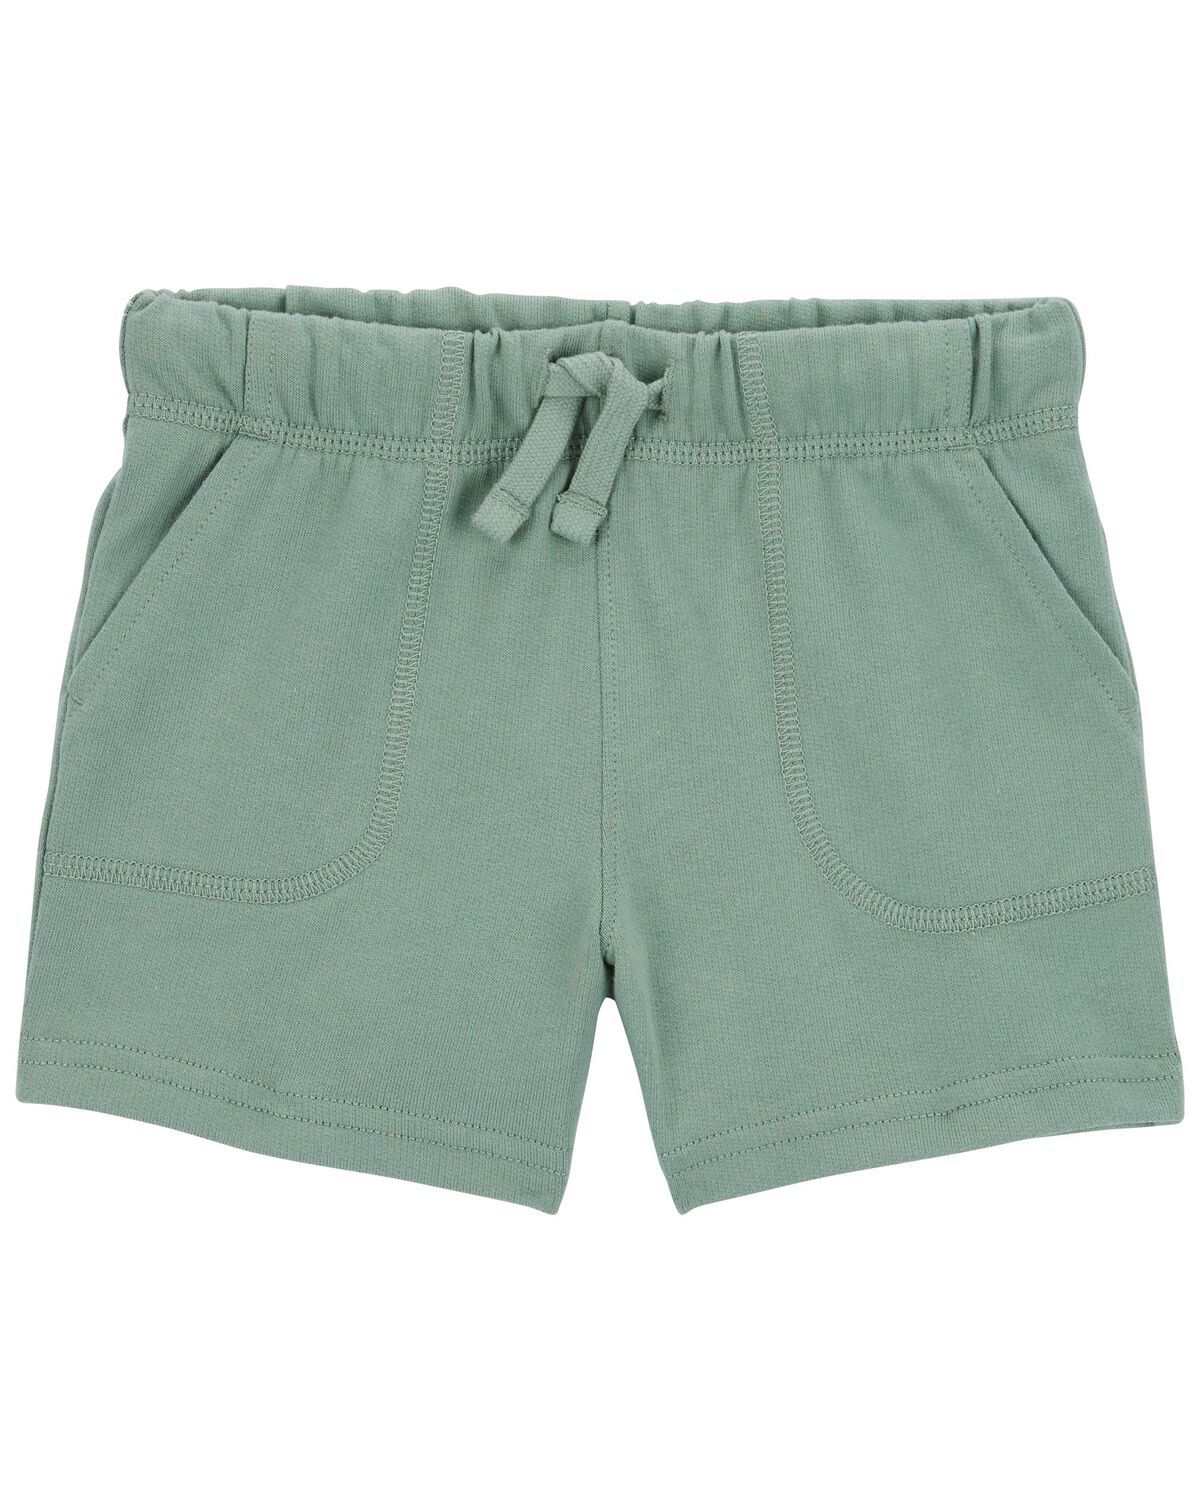 Toddler Pull-On Cotton Shorts | Carter's